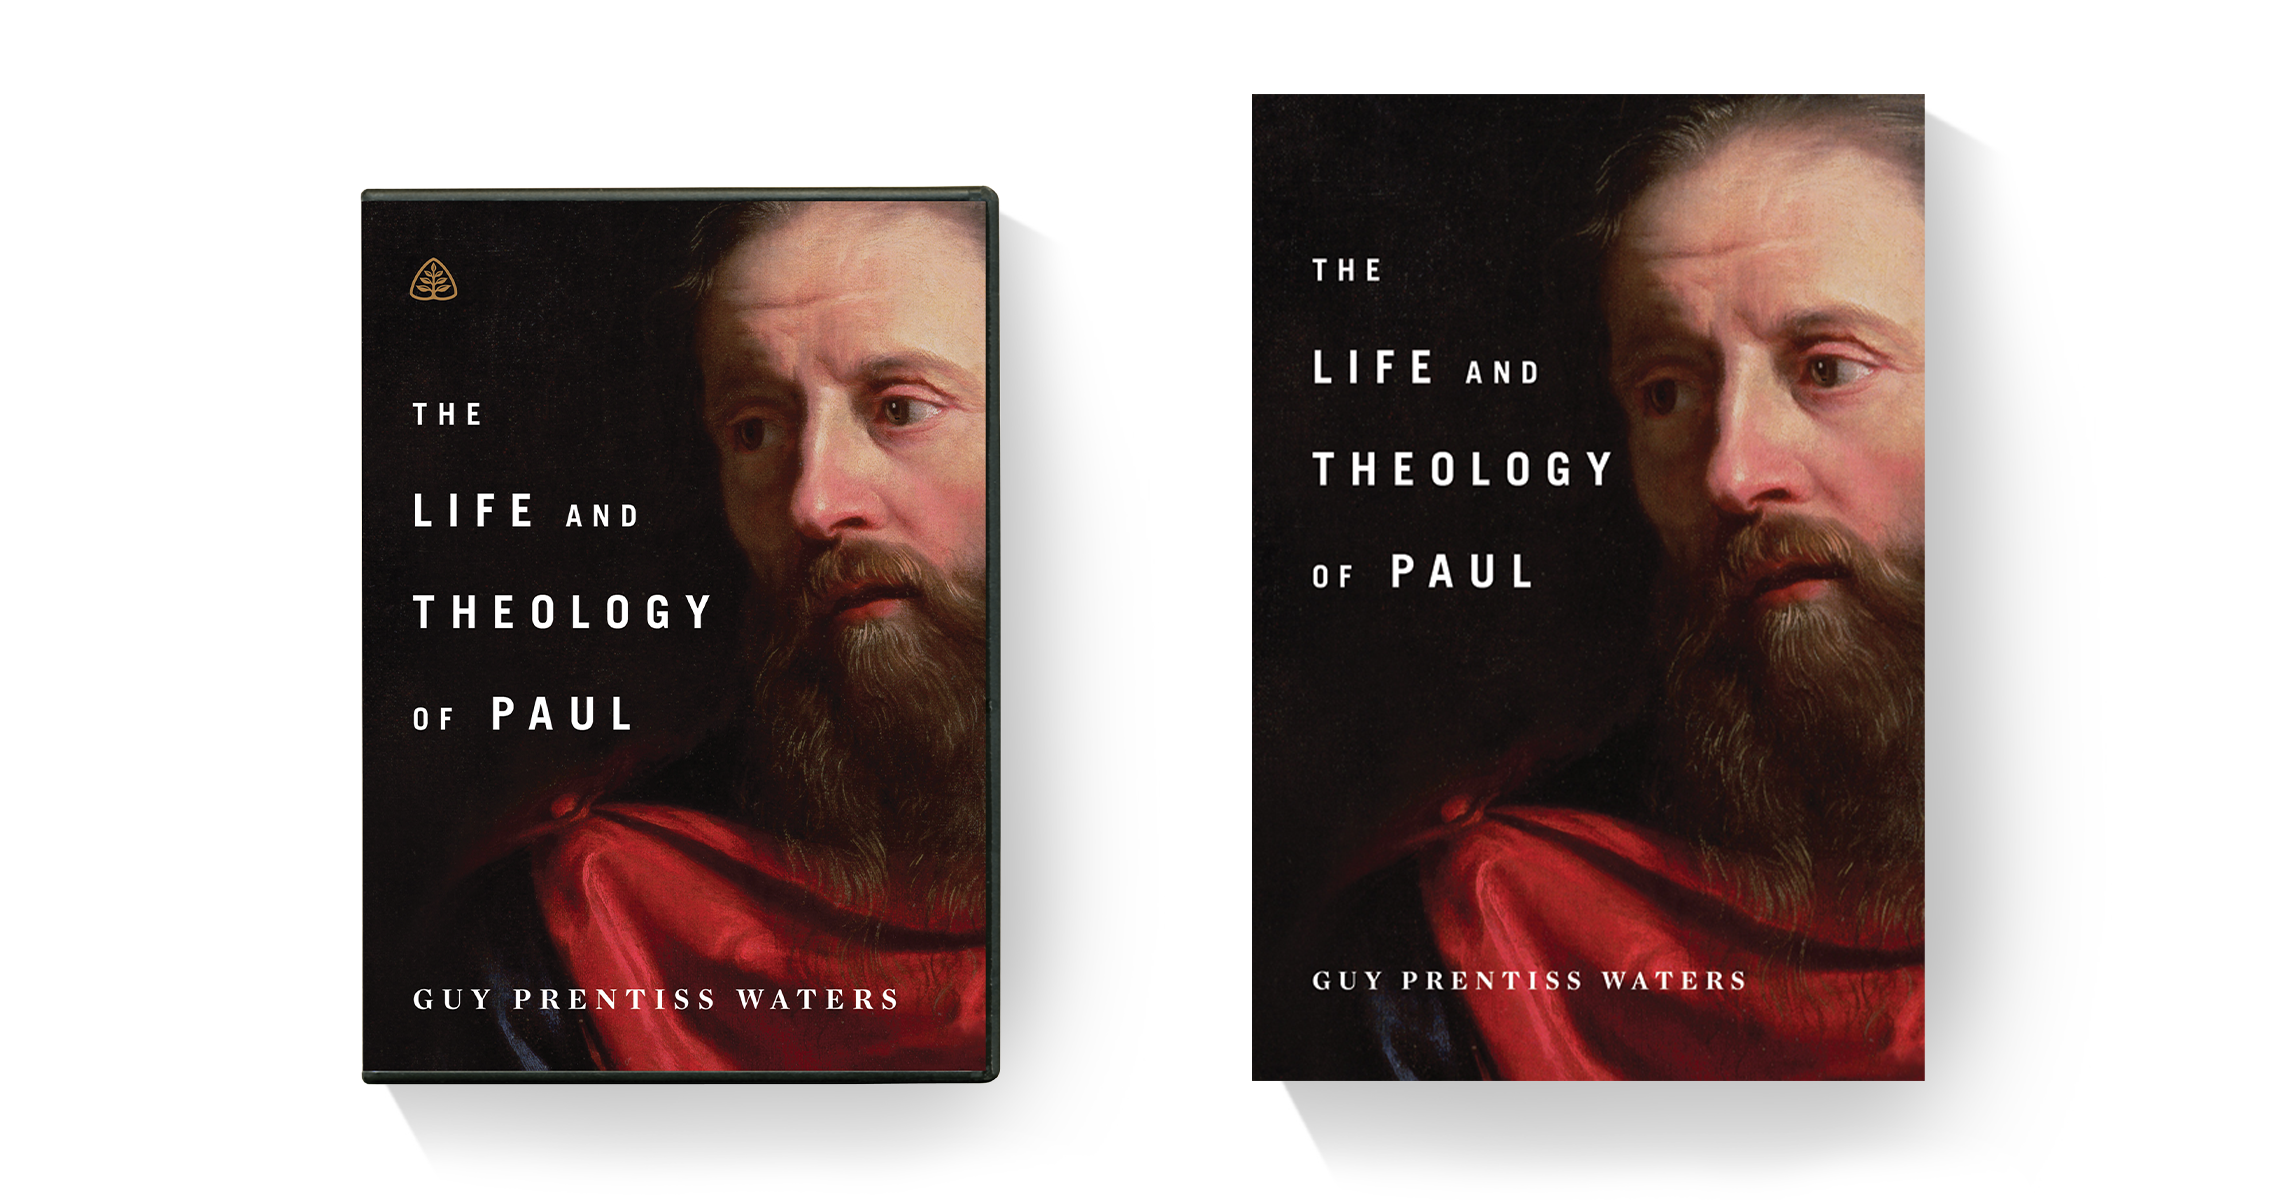 The Life and Theology of Paul